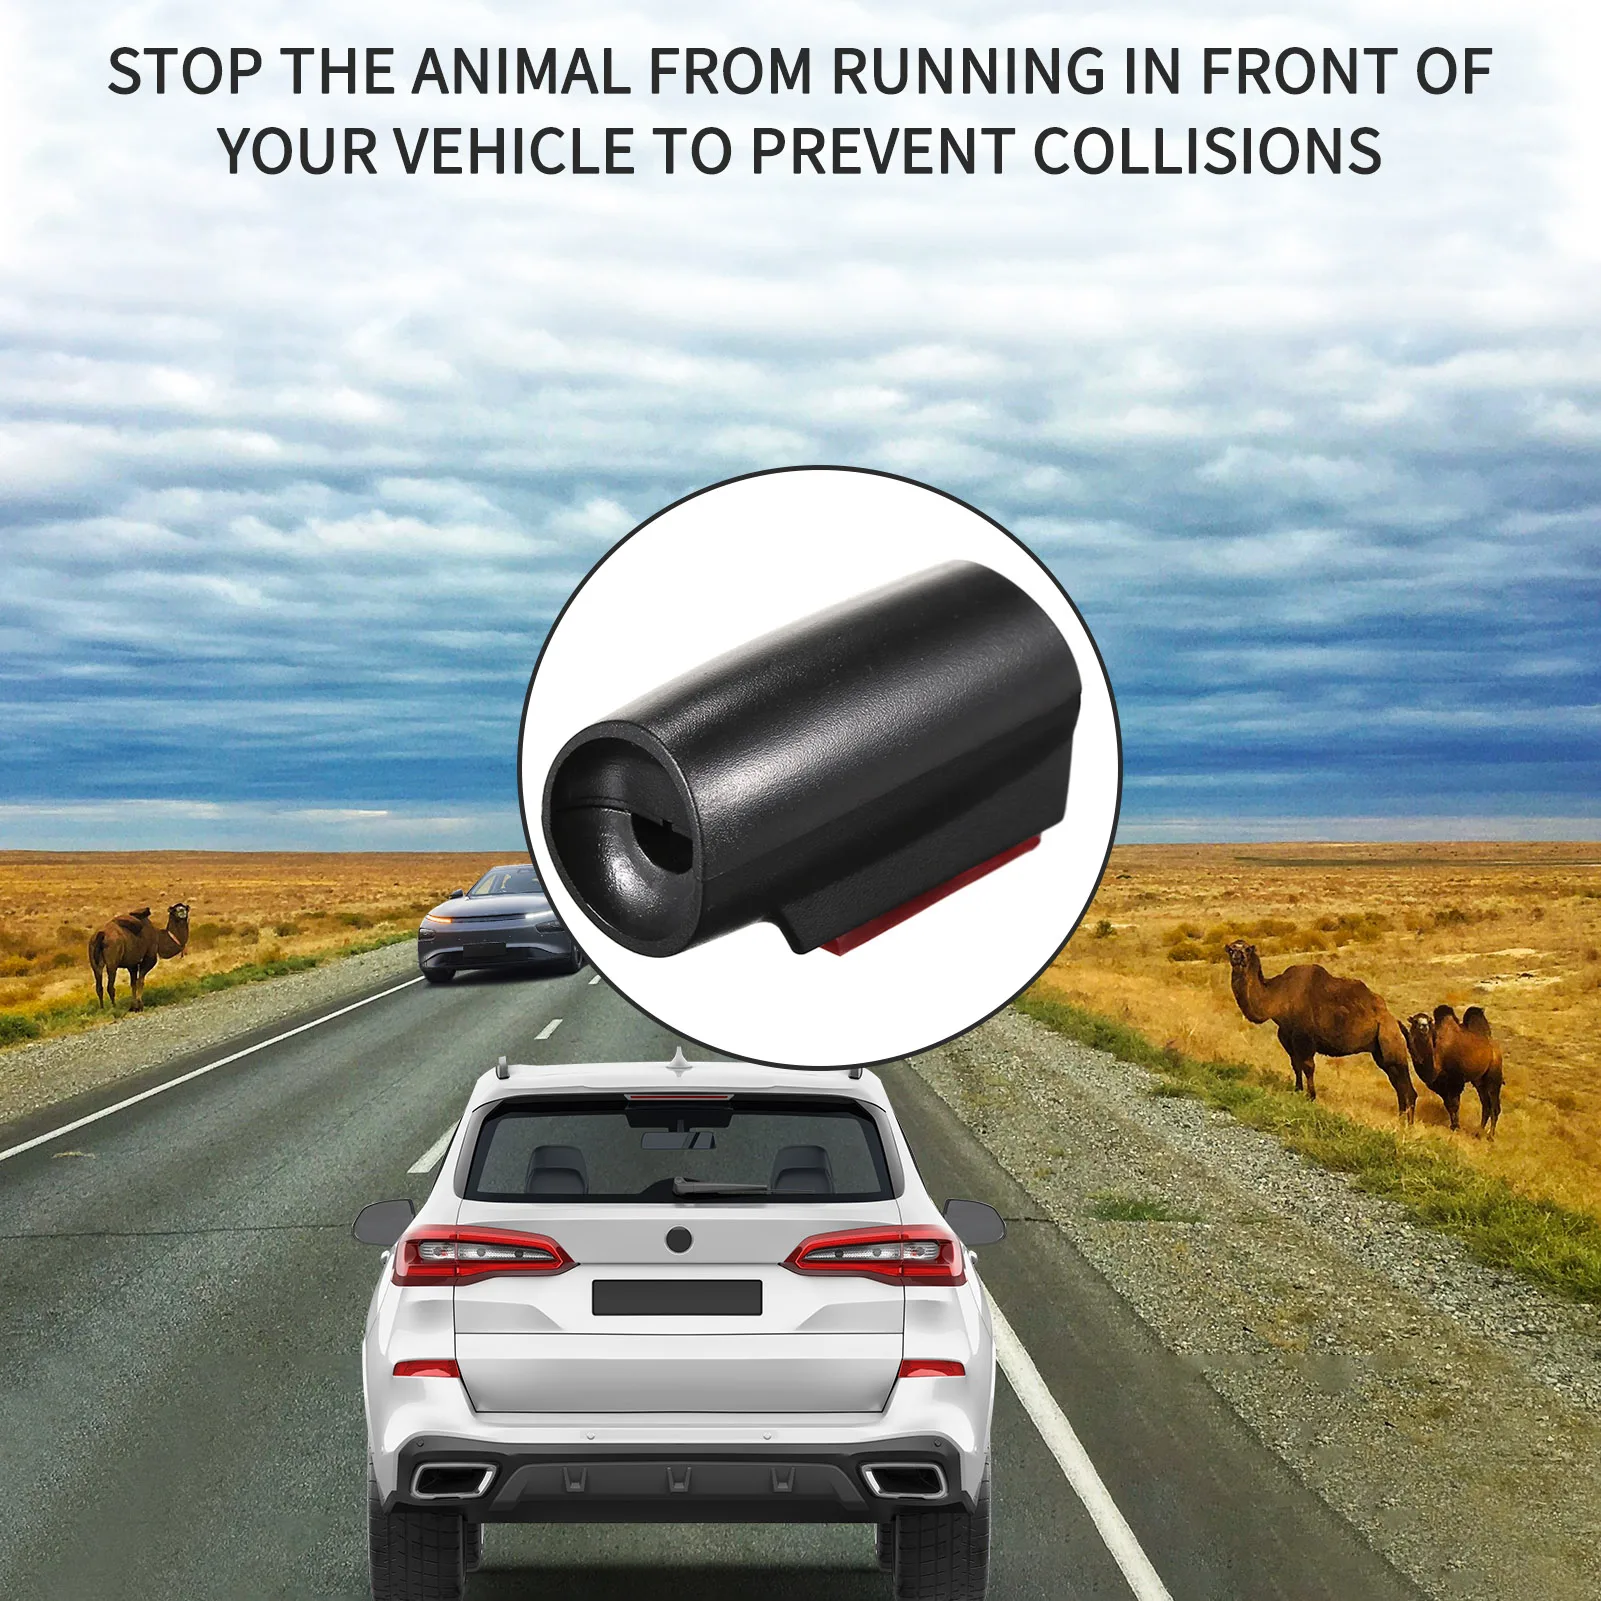 2 PCS Car Deer Whistle Avoids Deer Collisions Wildlife Warning Whistles  Warning Device for Truck Vehicles Motorcycles Cars - AliExpress